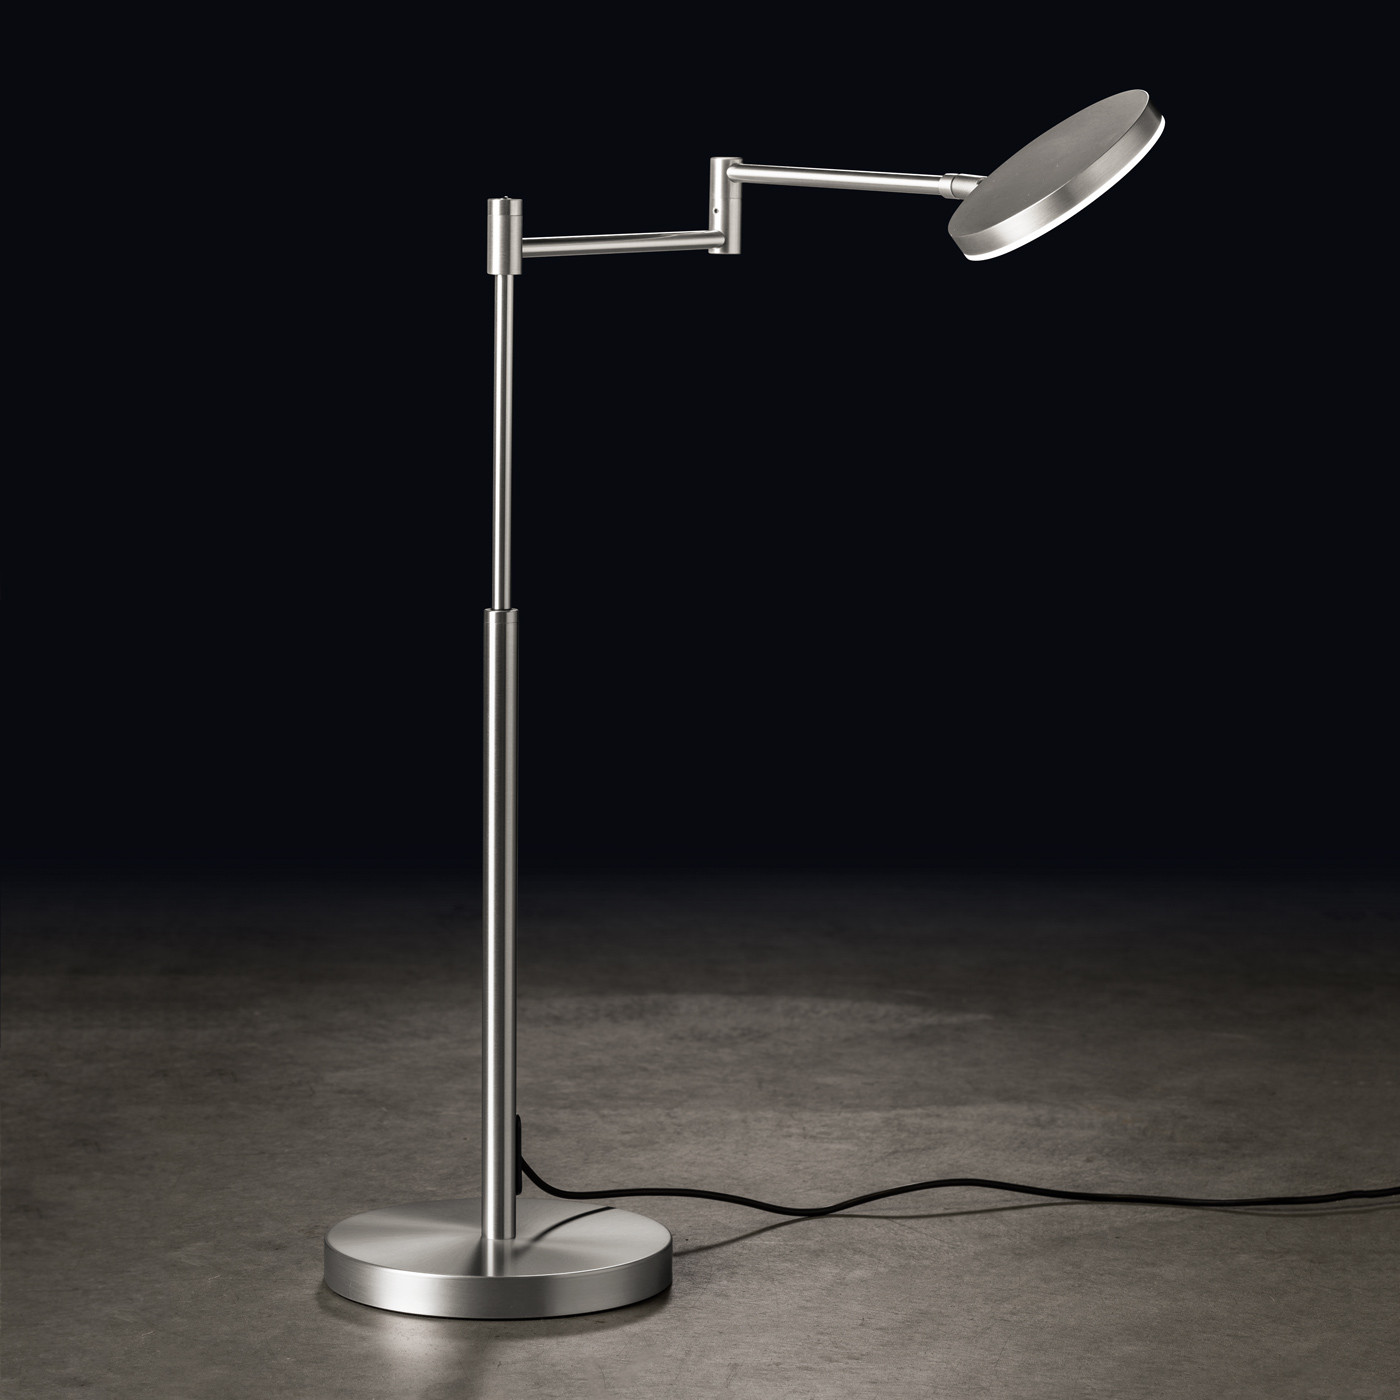 Holtkotter Plano 9657 Table Lamp At Nostraforma